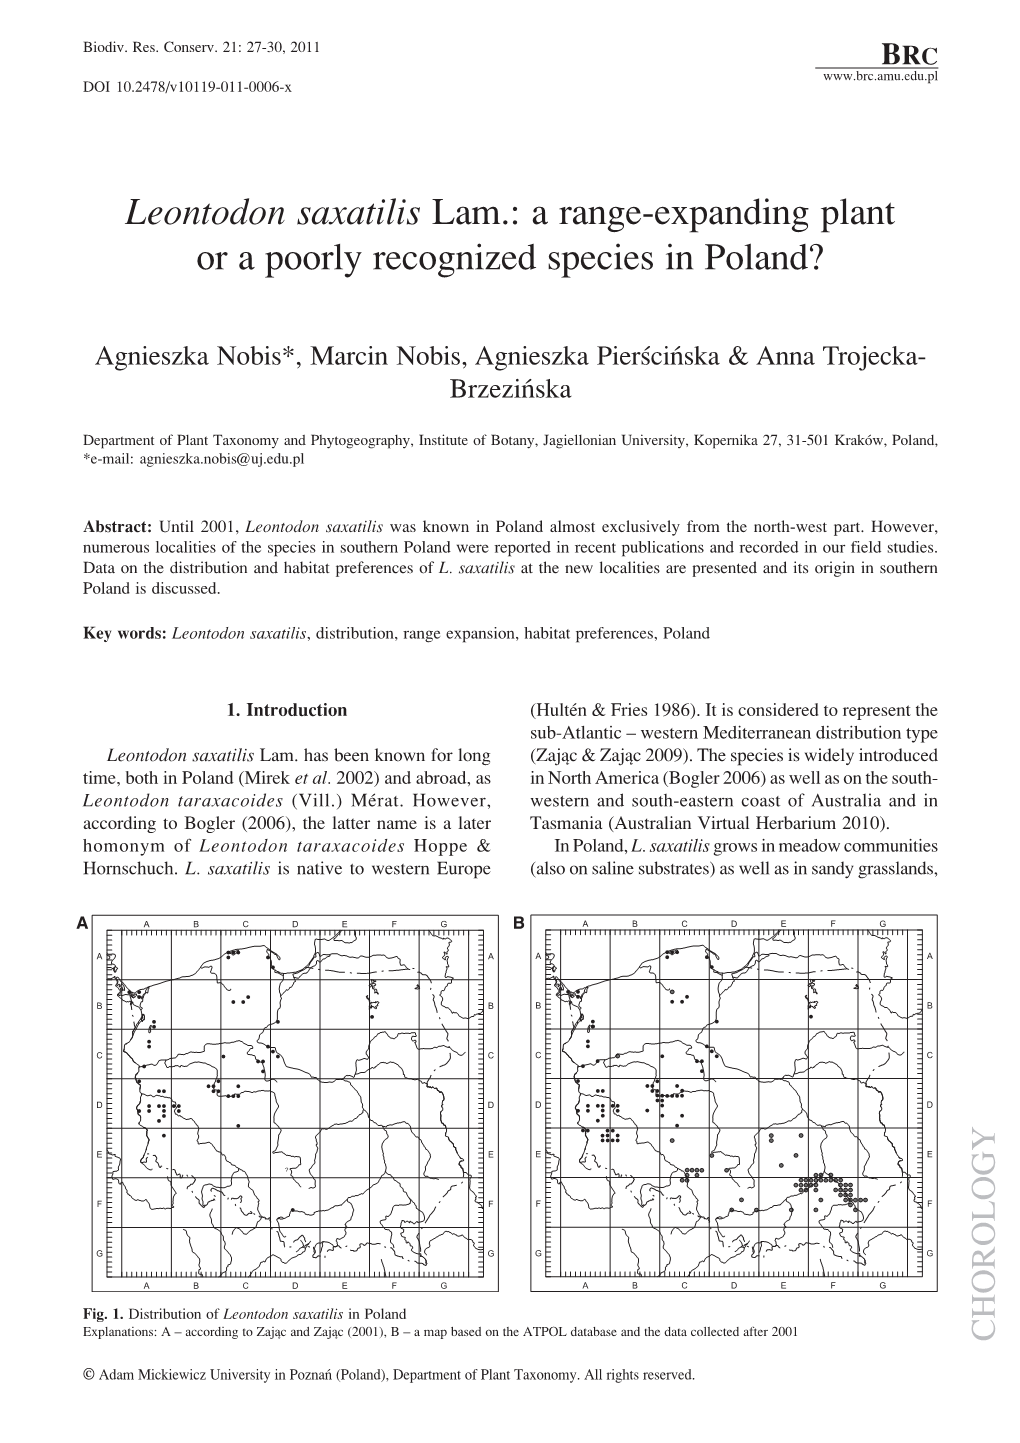 Leontodon Saxatilis Lam.: a Range-Expanding Plant Or a Poorly Recognized Species in Poland?